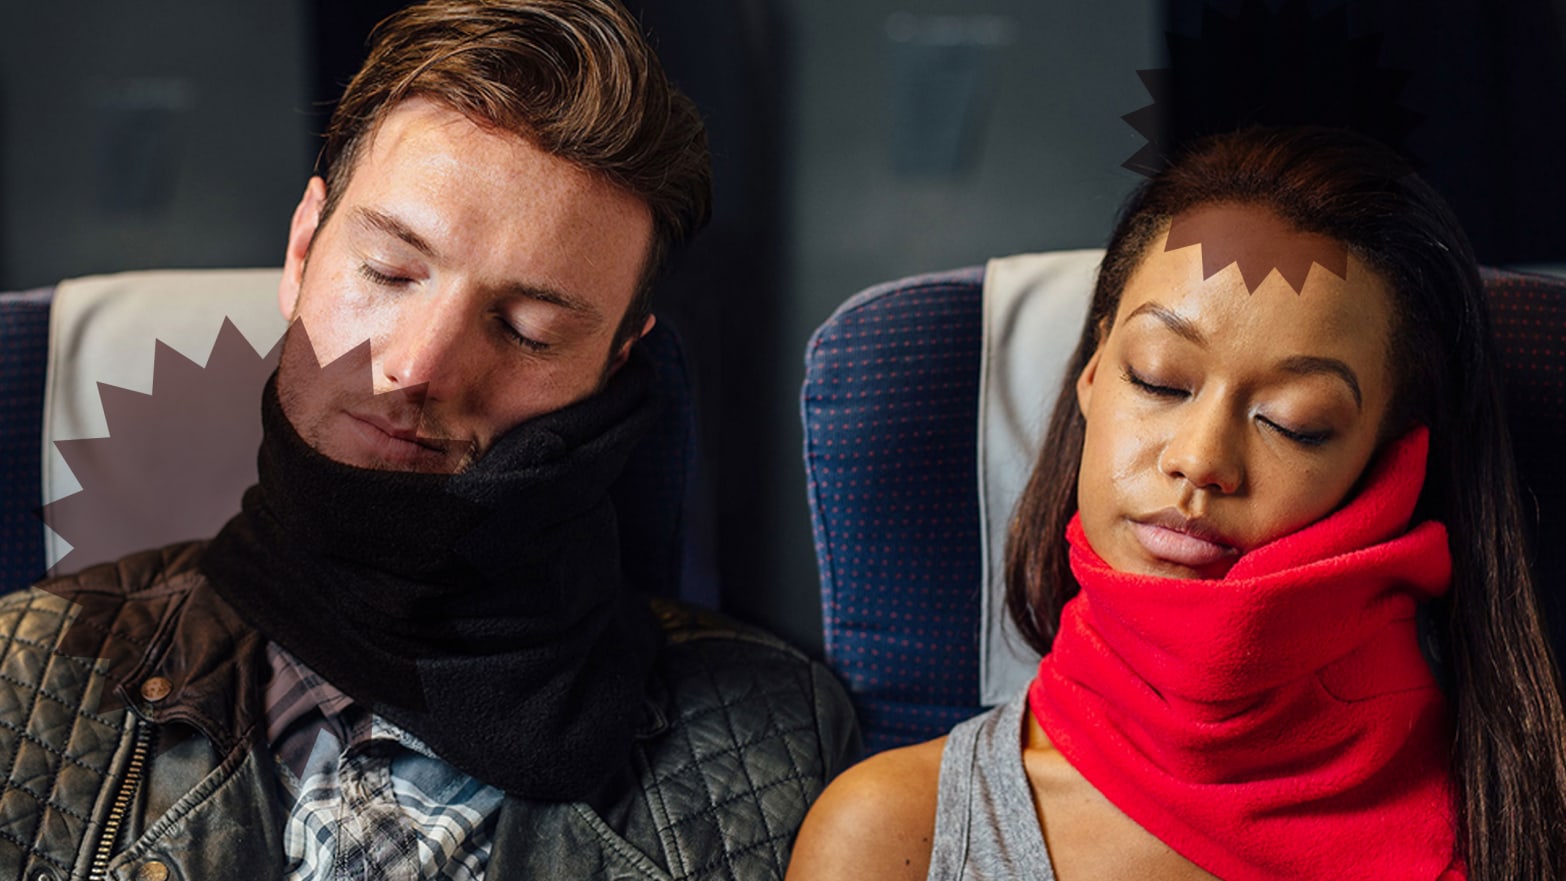 TRTL travel neck support pillow review